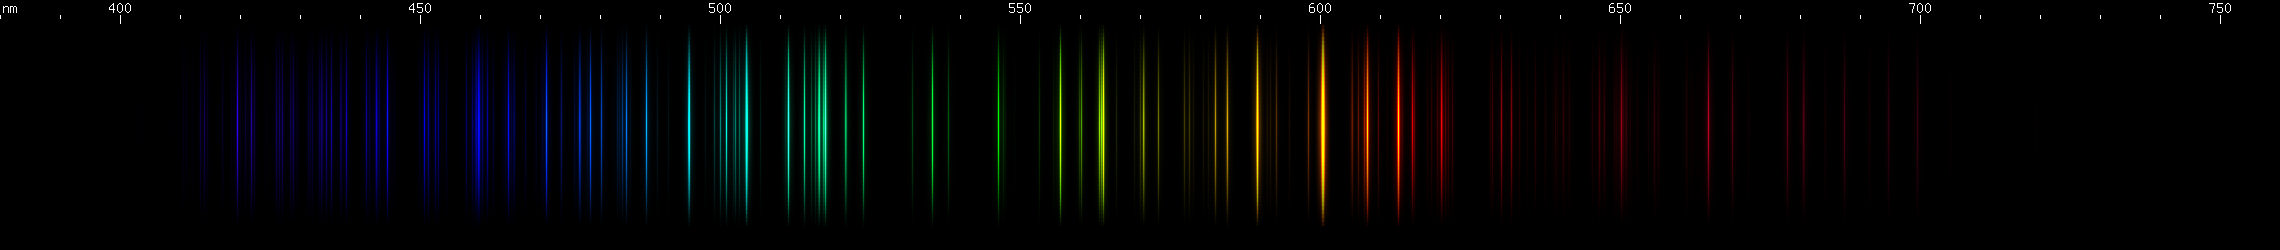 Spectral Lines of Antimony